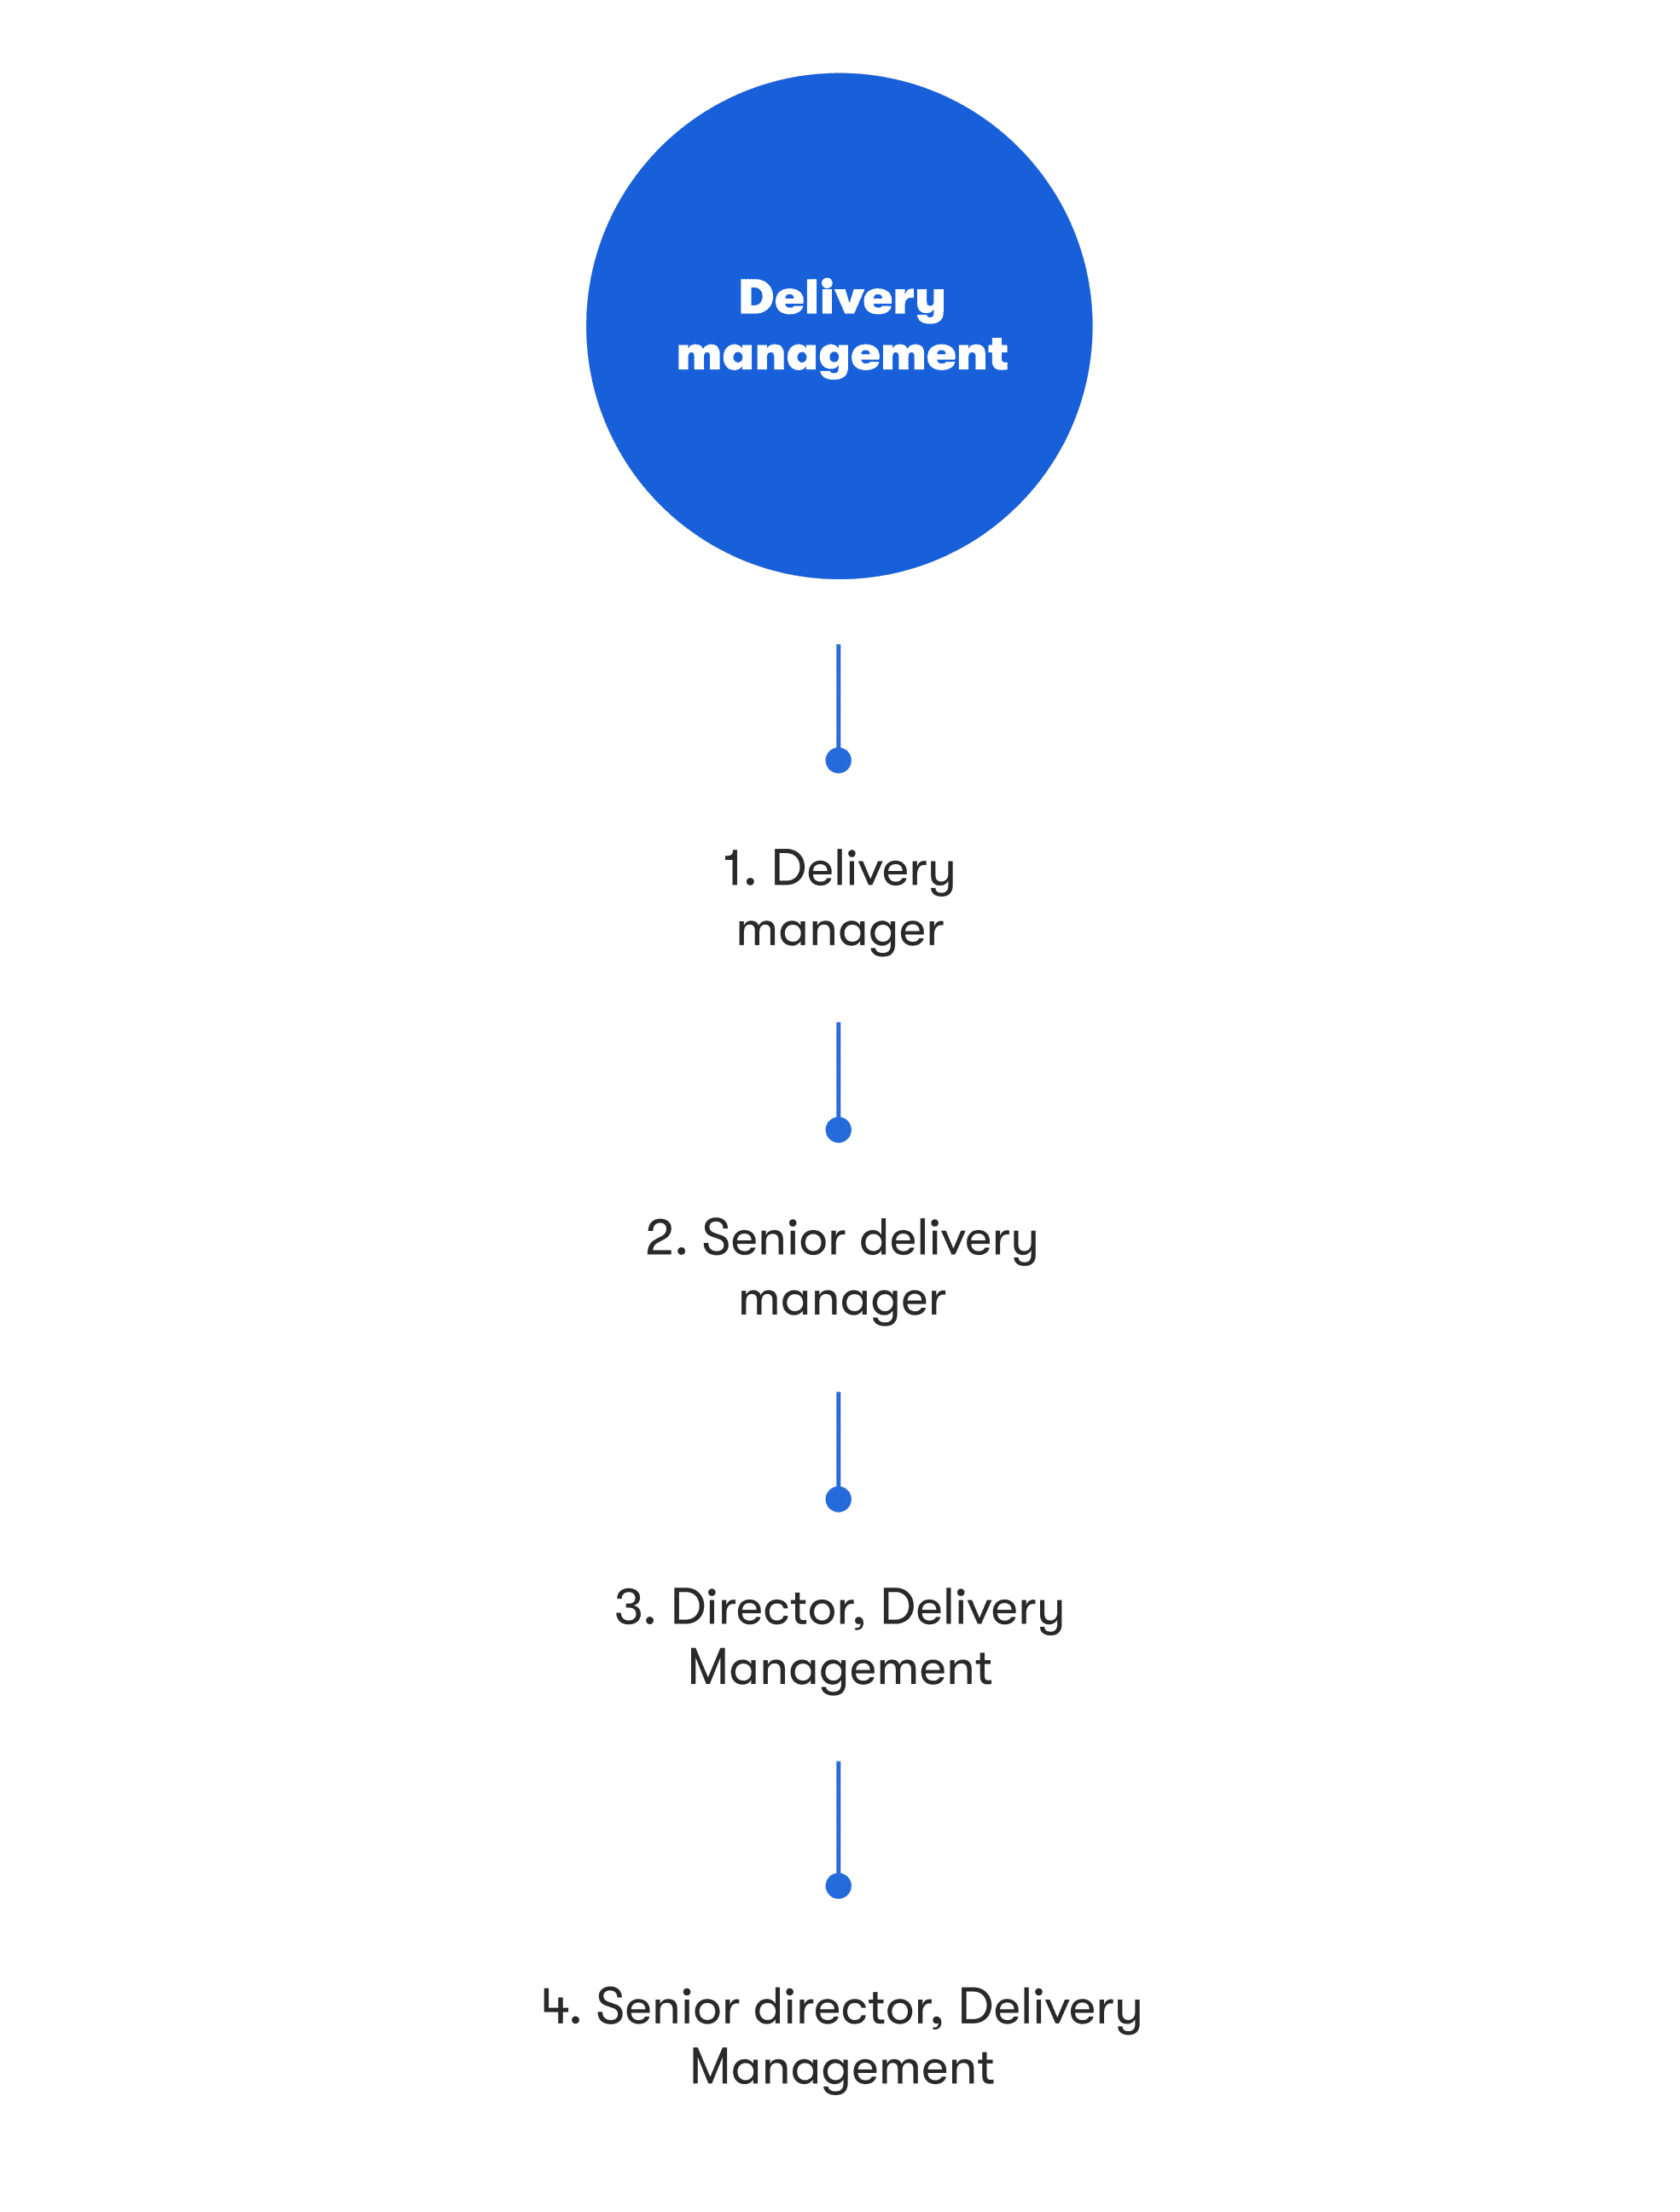 Delivery management career path